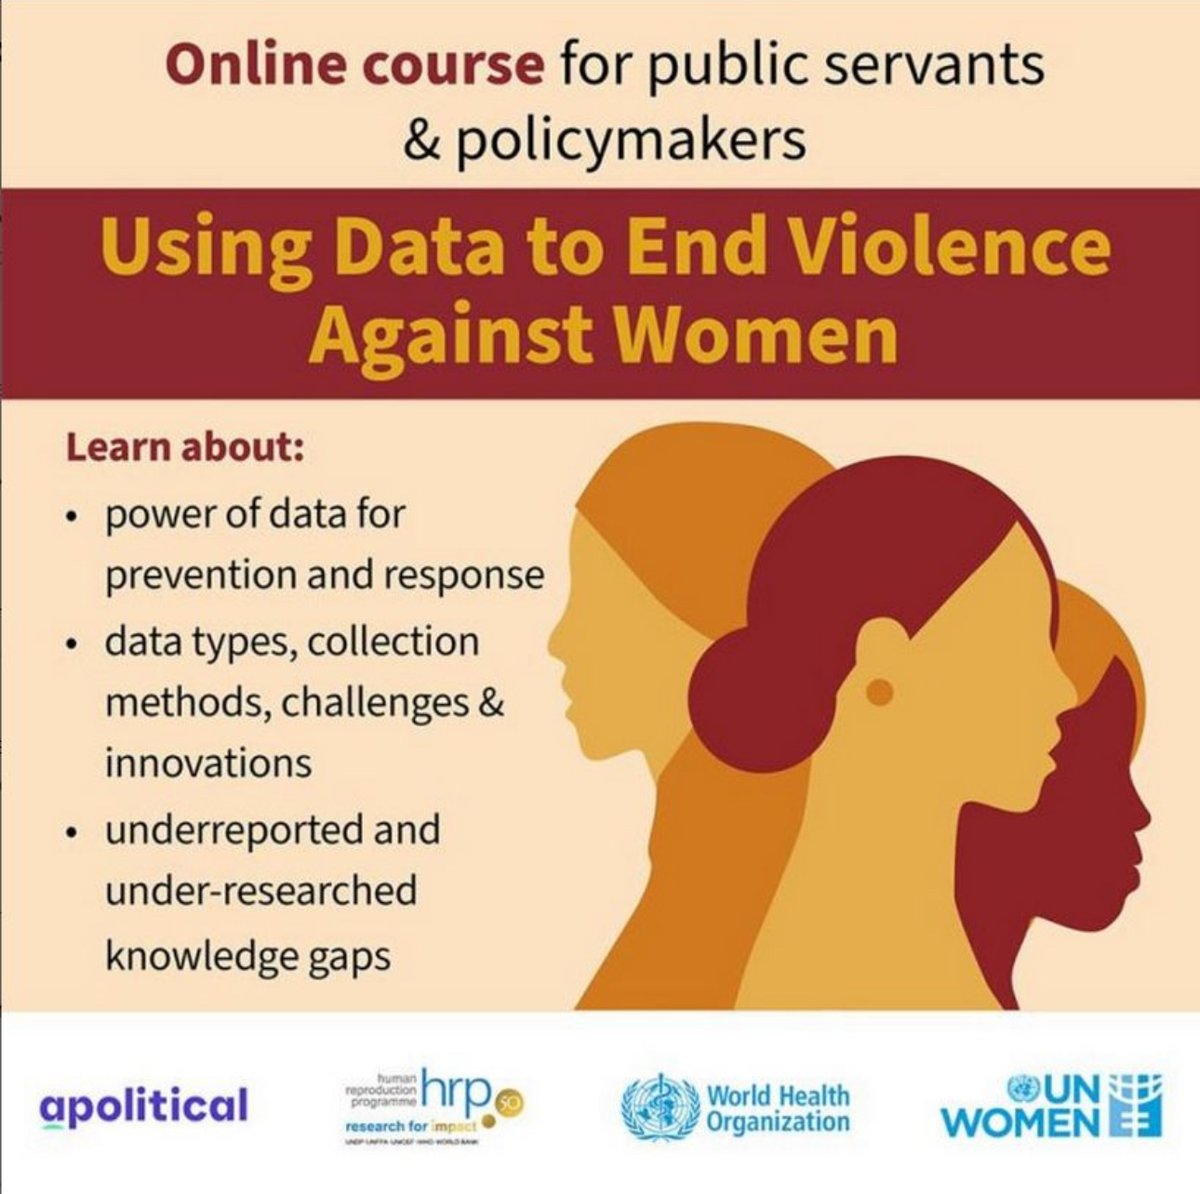 👩‍💼🗓 Self-paced learning open to any public servant eager to understand the crucial role of data in ending violence against women. No prior experience required.

🔗 More information: bit.ly/3tB6VYv

#EndVAW #DataForChange #PublicService #WomenEmpowerment #Opportunity